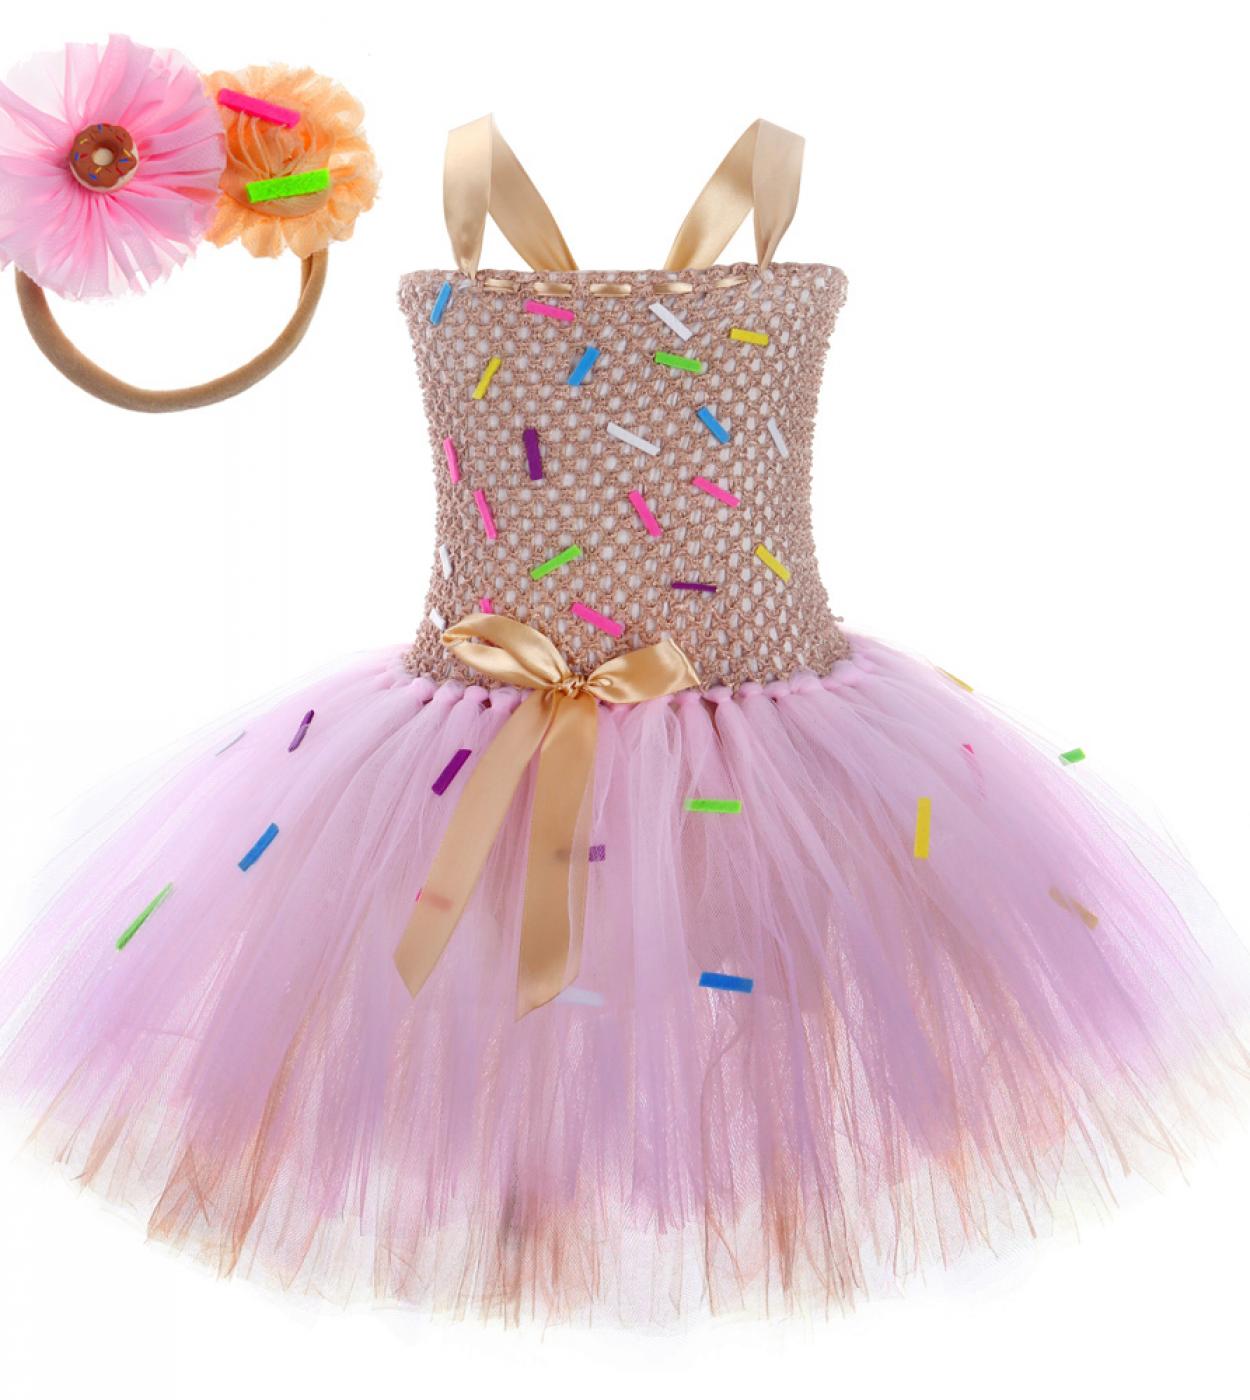 Baby Girls Candy Donuts Tutu Dress For Kids Doughnut Birthday Party Costumes Toddler Girl Photoshoot Tulle Outfit New Ye